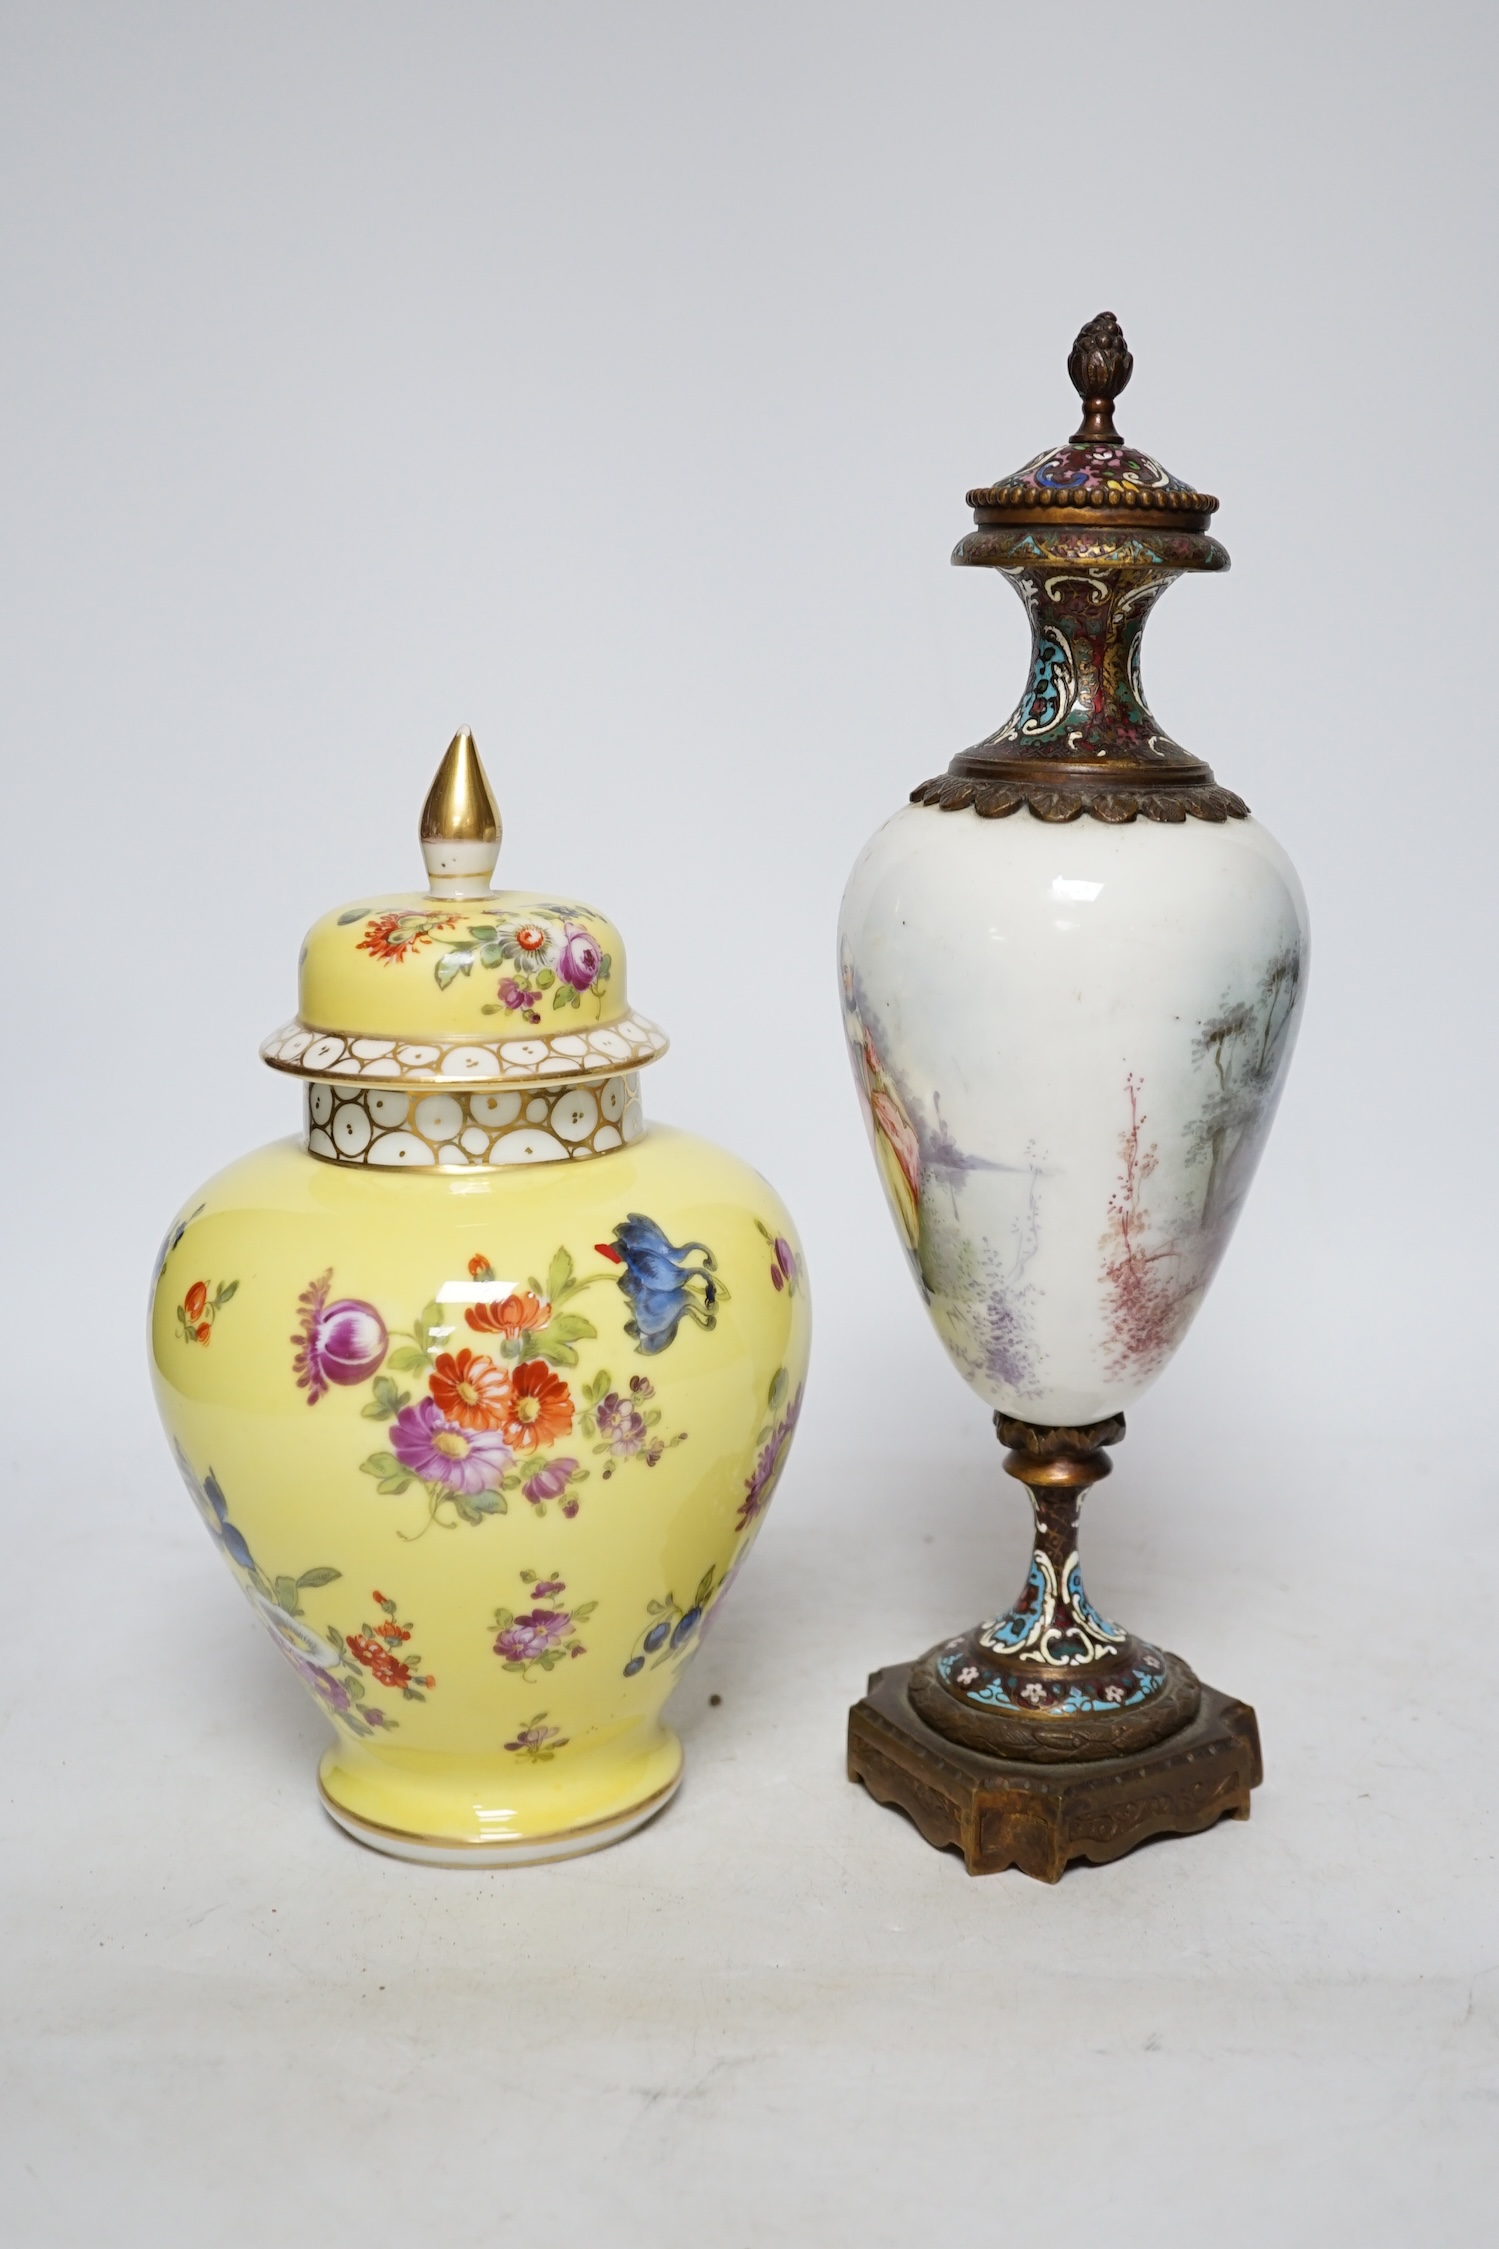 A 19th century French ormolu, enamel and porcelain urn and cover and a Dresden yellow urn and cover, - Image 2 of 3